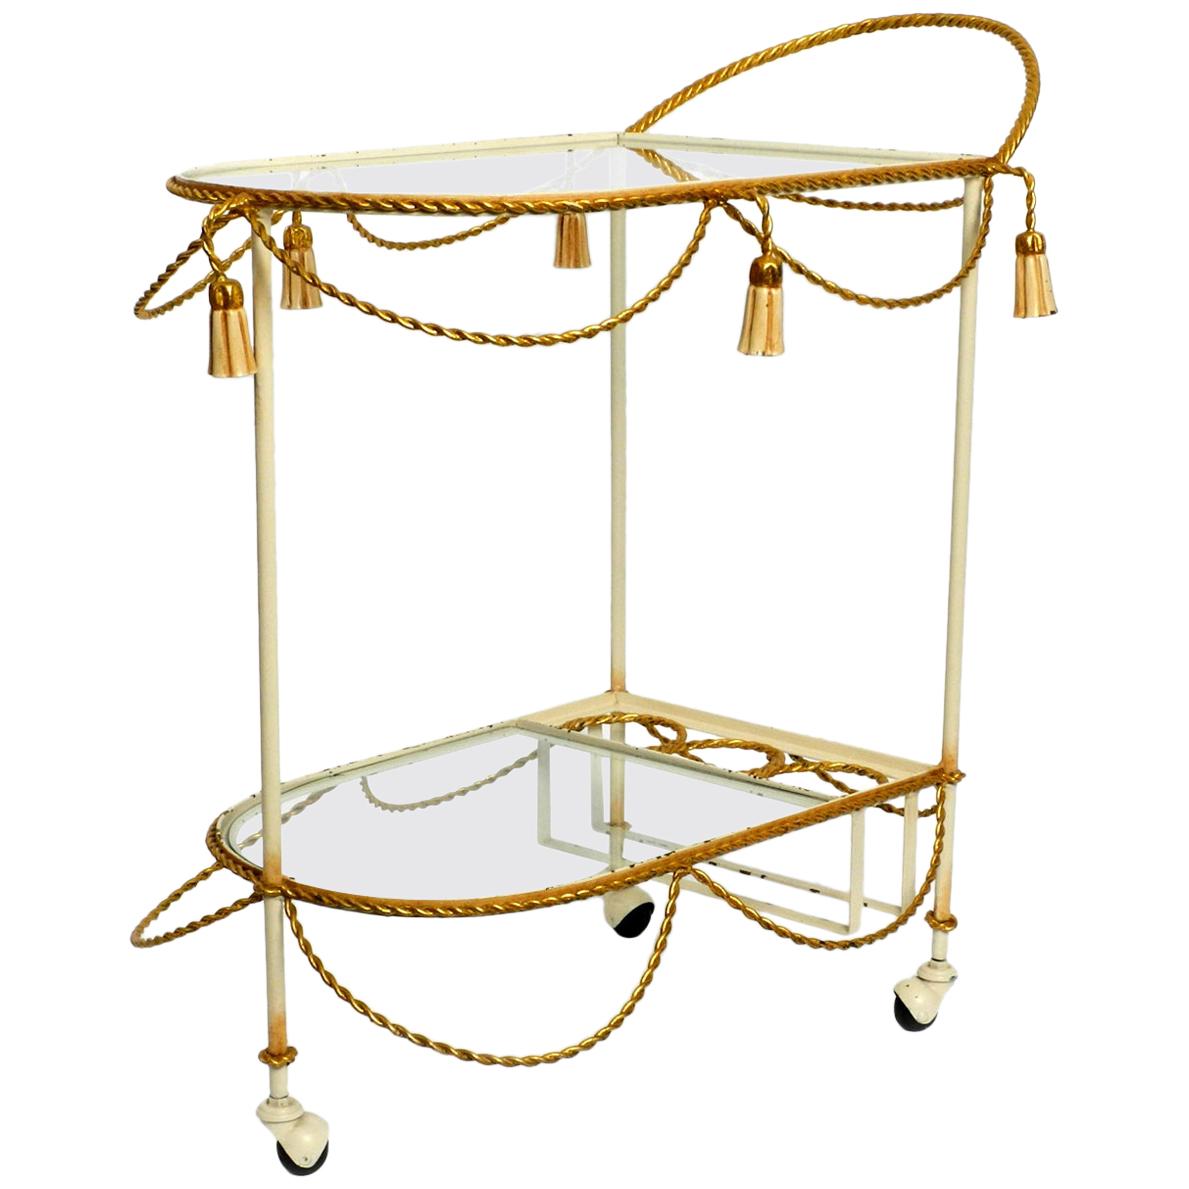 Italian Midcentury Bar Cart Made of Metal in Beige and Gold with Glass Elements